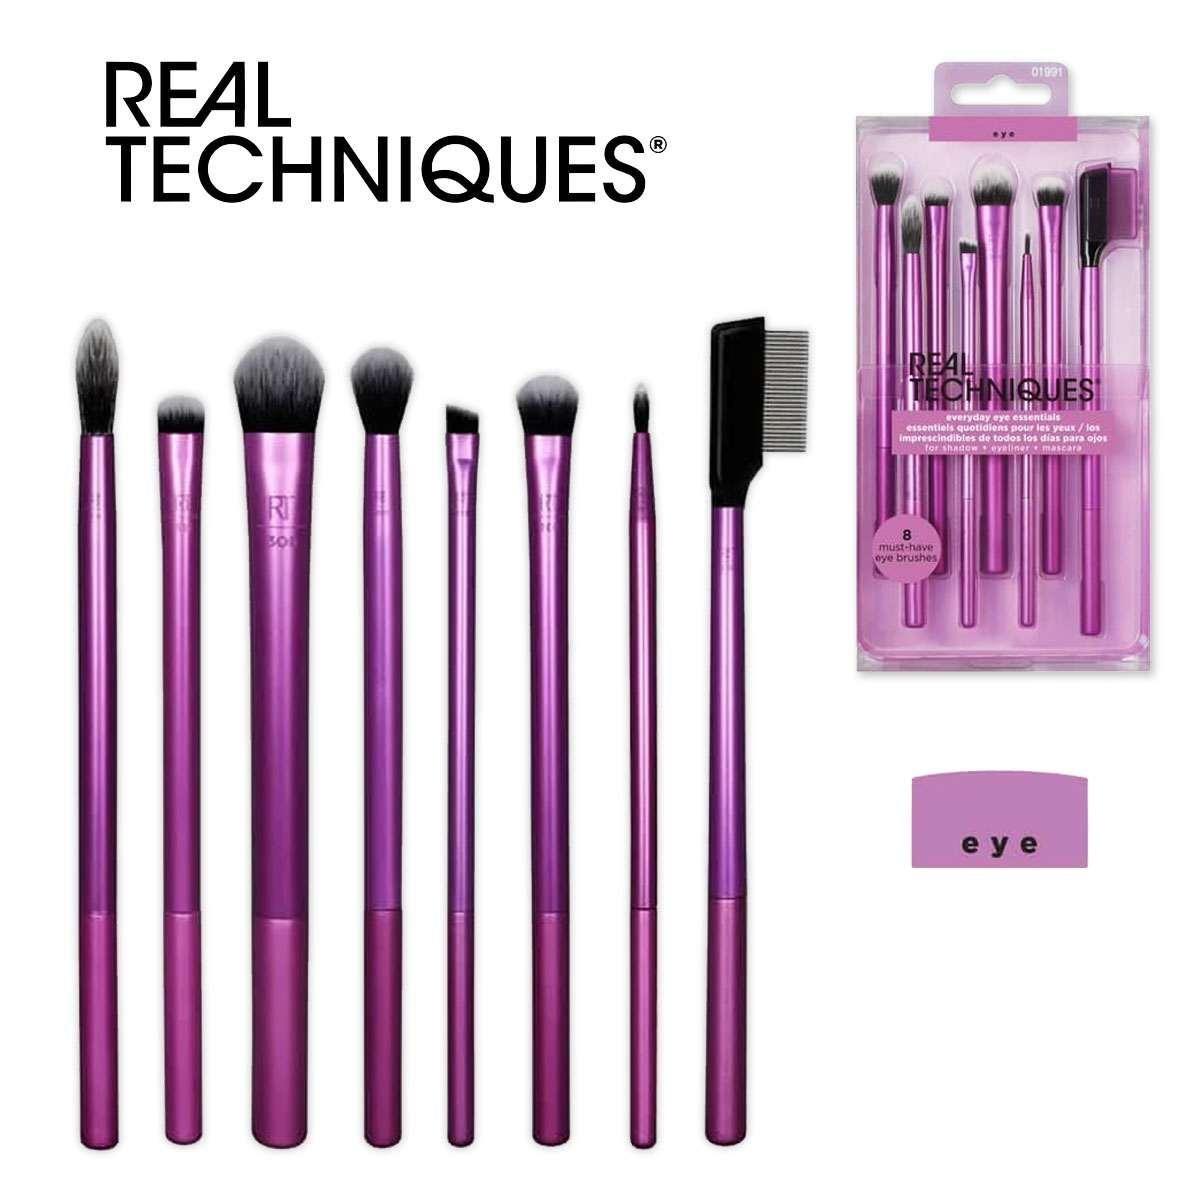 Real techniques Real techniques everyday eye essential set 8